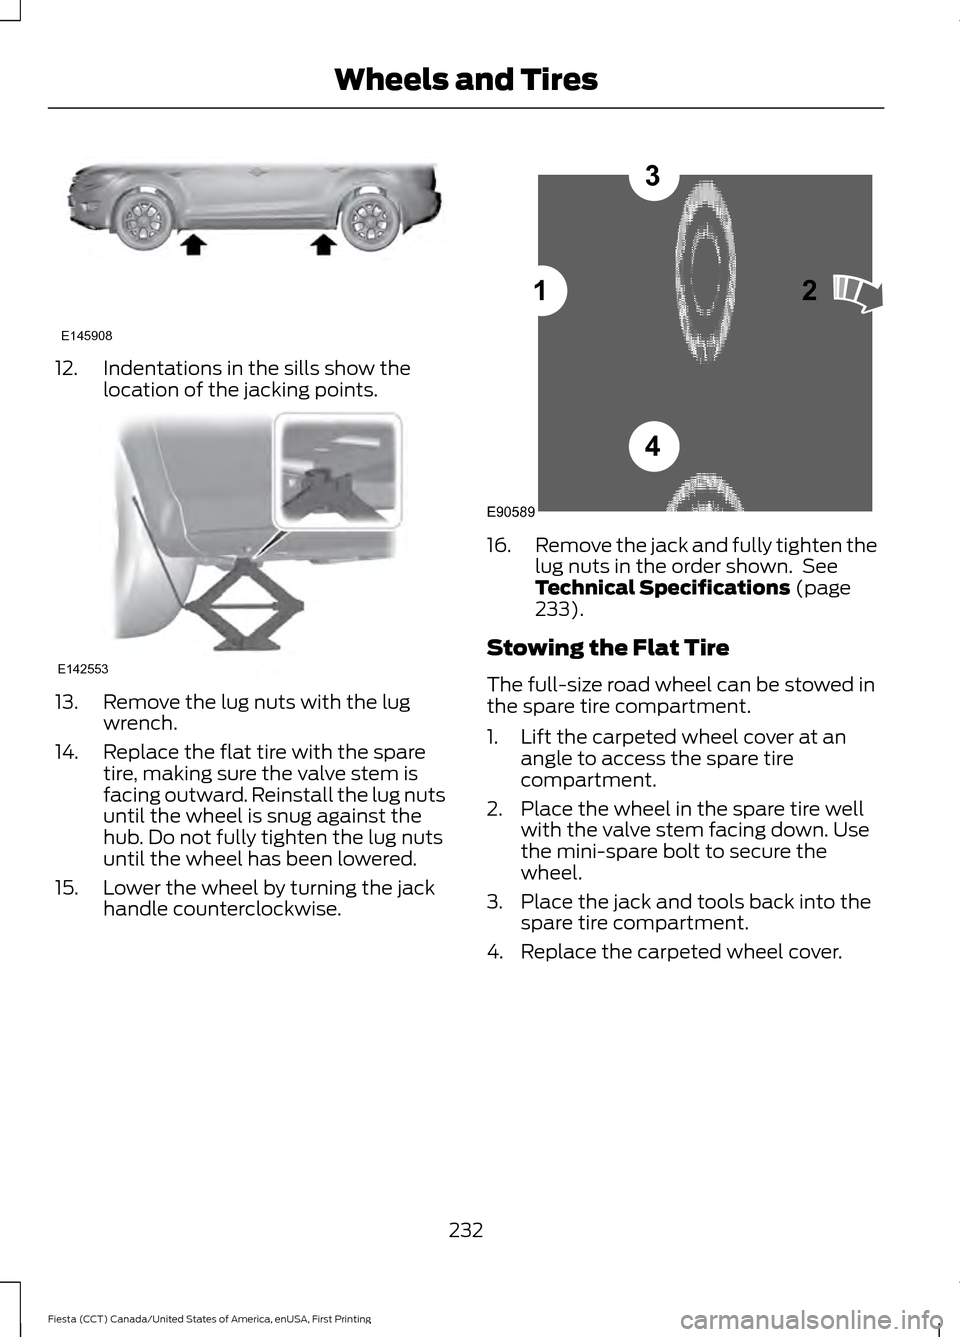 FORD FIESTA 2016 6.G Owners Manual 12. Indentations in the sills show the
location of the jacking points.13. Remove the lug nuts with the lug
wrench.
14. Replace the flat tire with the spare tire, making sure the valve stem is
facing o